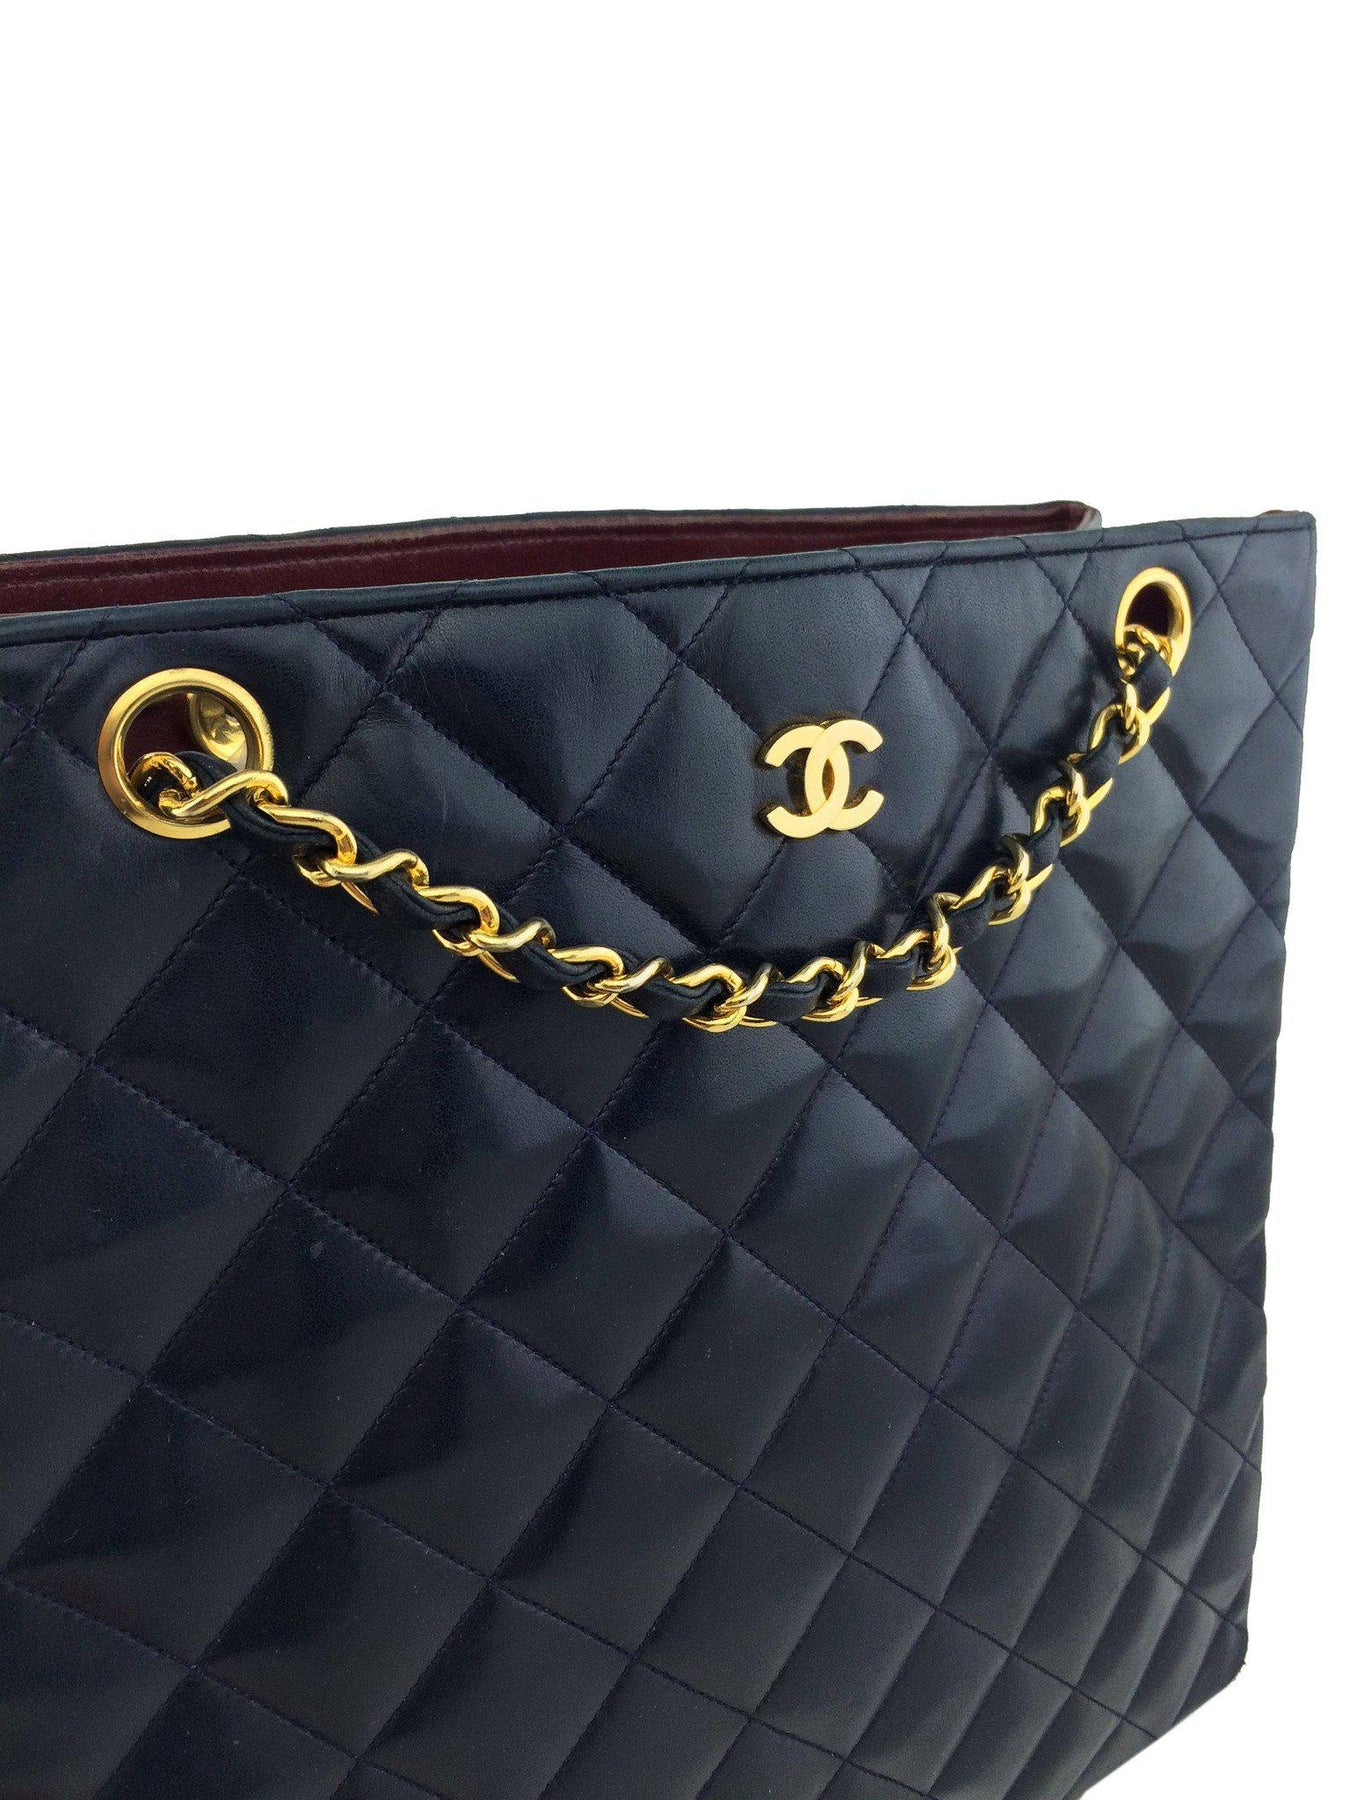 Chanel Vintage Quilted Lambskin Medium Shopper Tote Bag - Consigned Designs